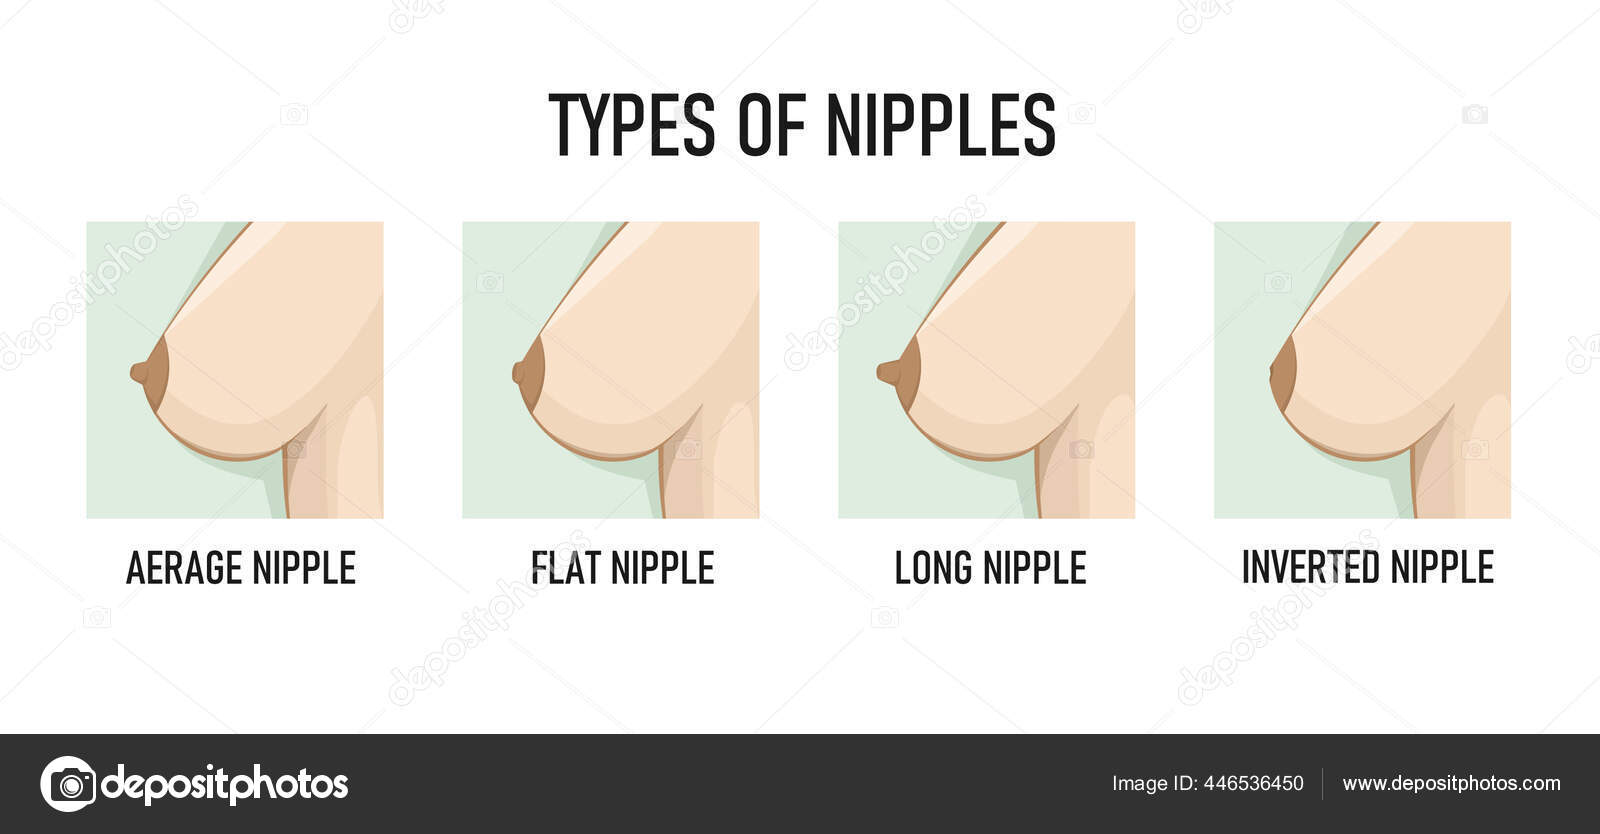 Different Types of Nipples, Explained (With IMAGES) - Thrillist